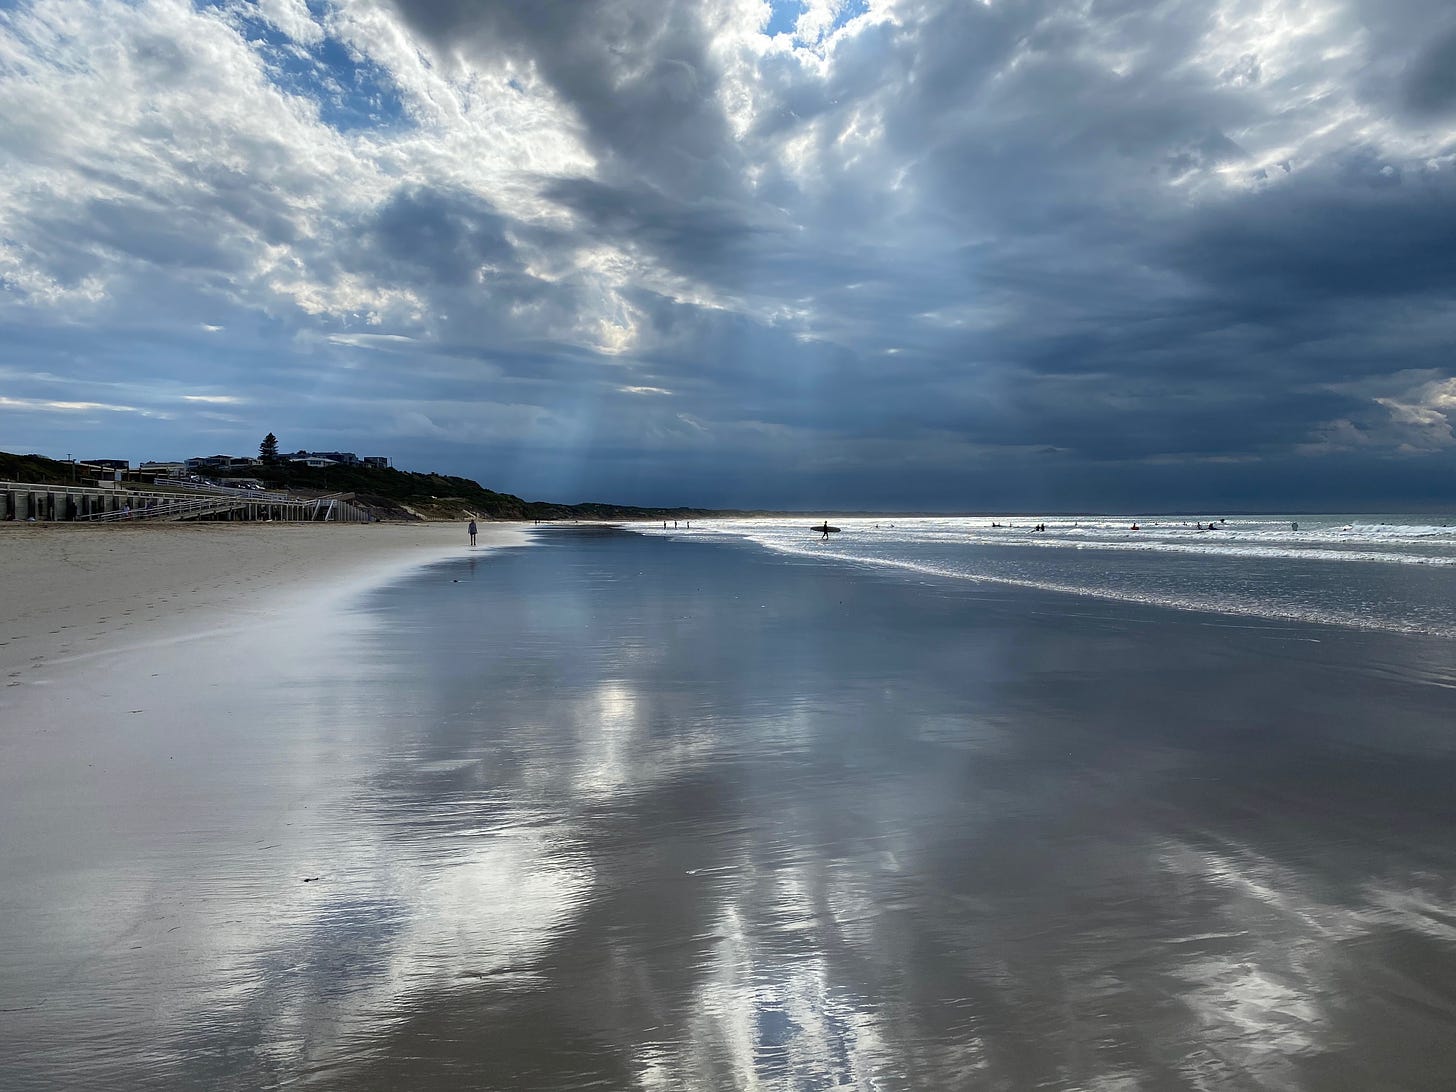 Beach scene, early morning. A wide-angle shot of Ocean Grove beach, with beams of sunlight from a mostly cloudy sky. On the right, the surf, on the left, the dunes. The light is reflected strongly in the wet sand. A few swimmers and a surfer with board under arm are in the middle distance.